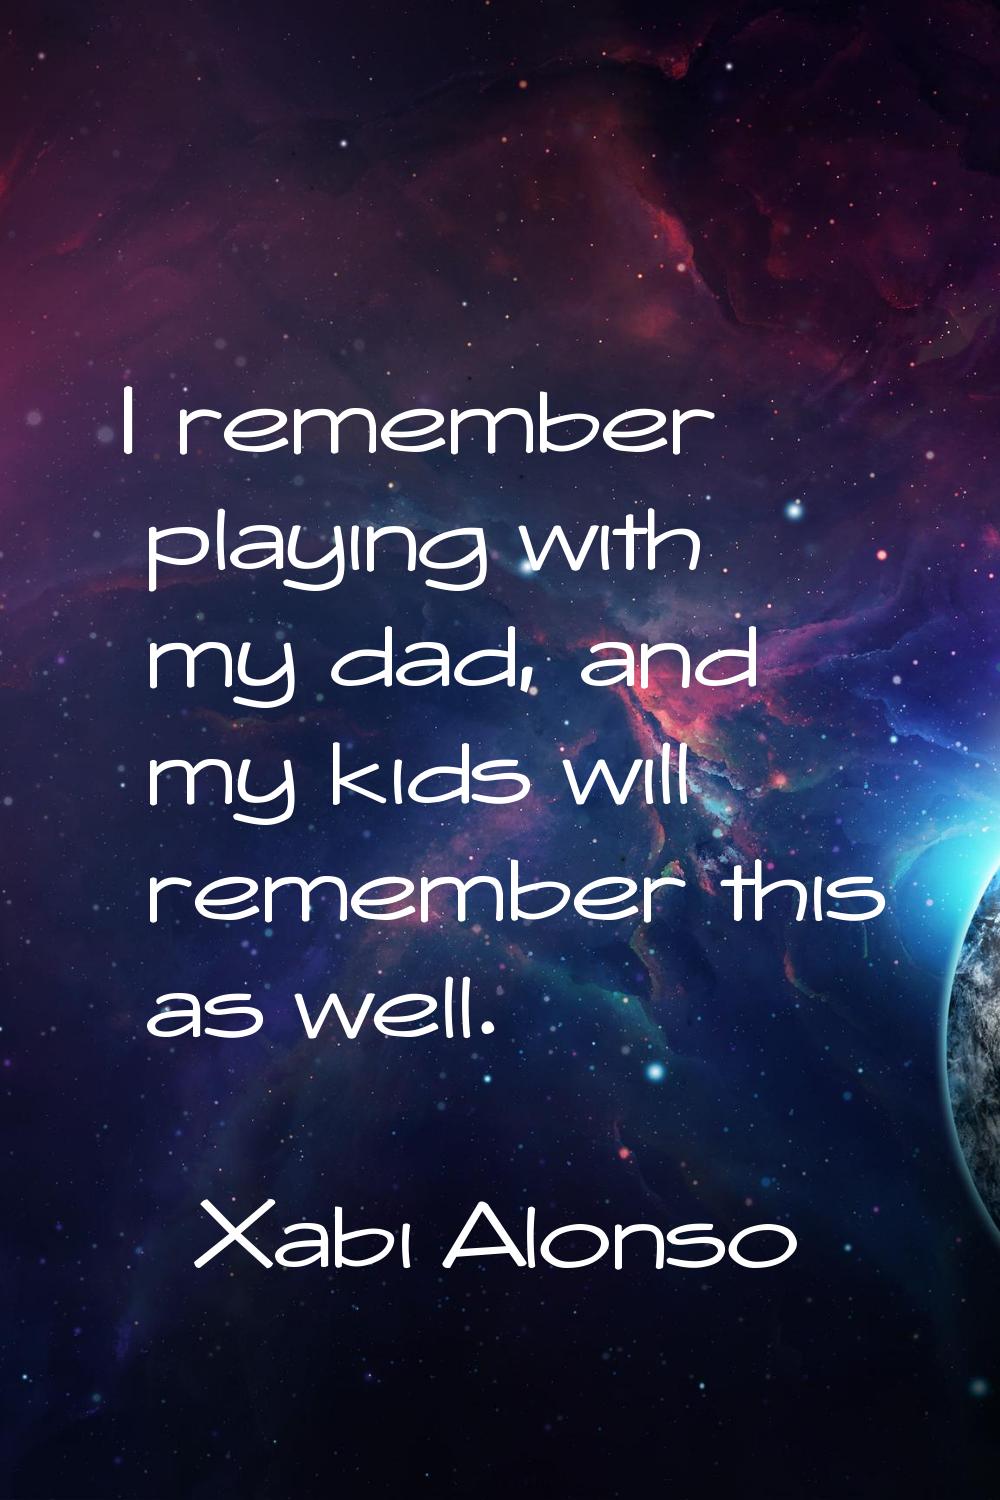 I remember playing with my dad, and my kids will remember this as well.